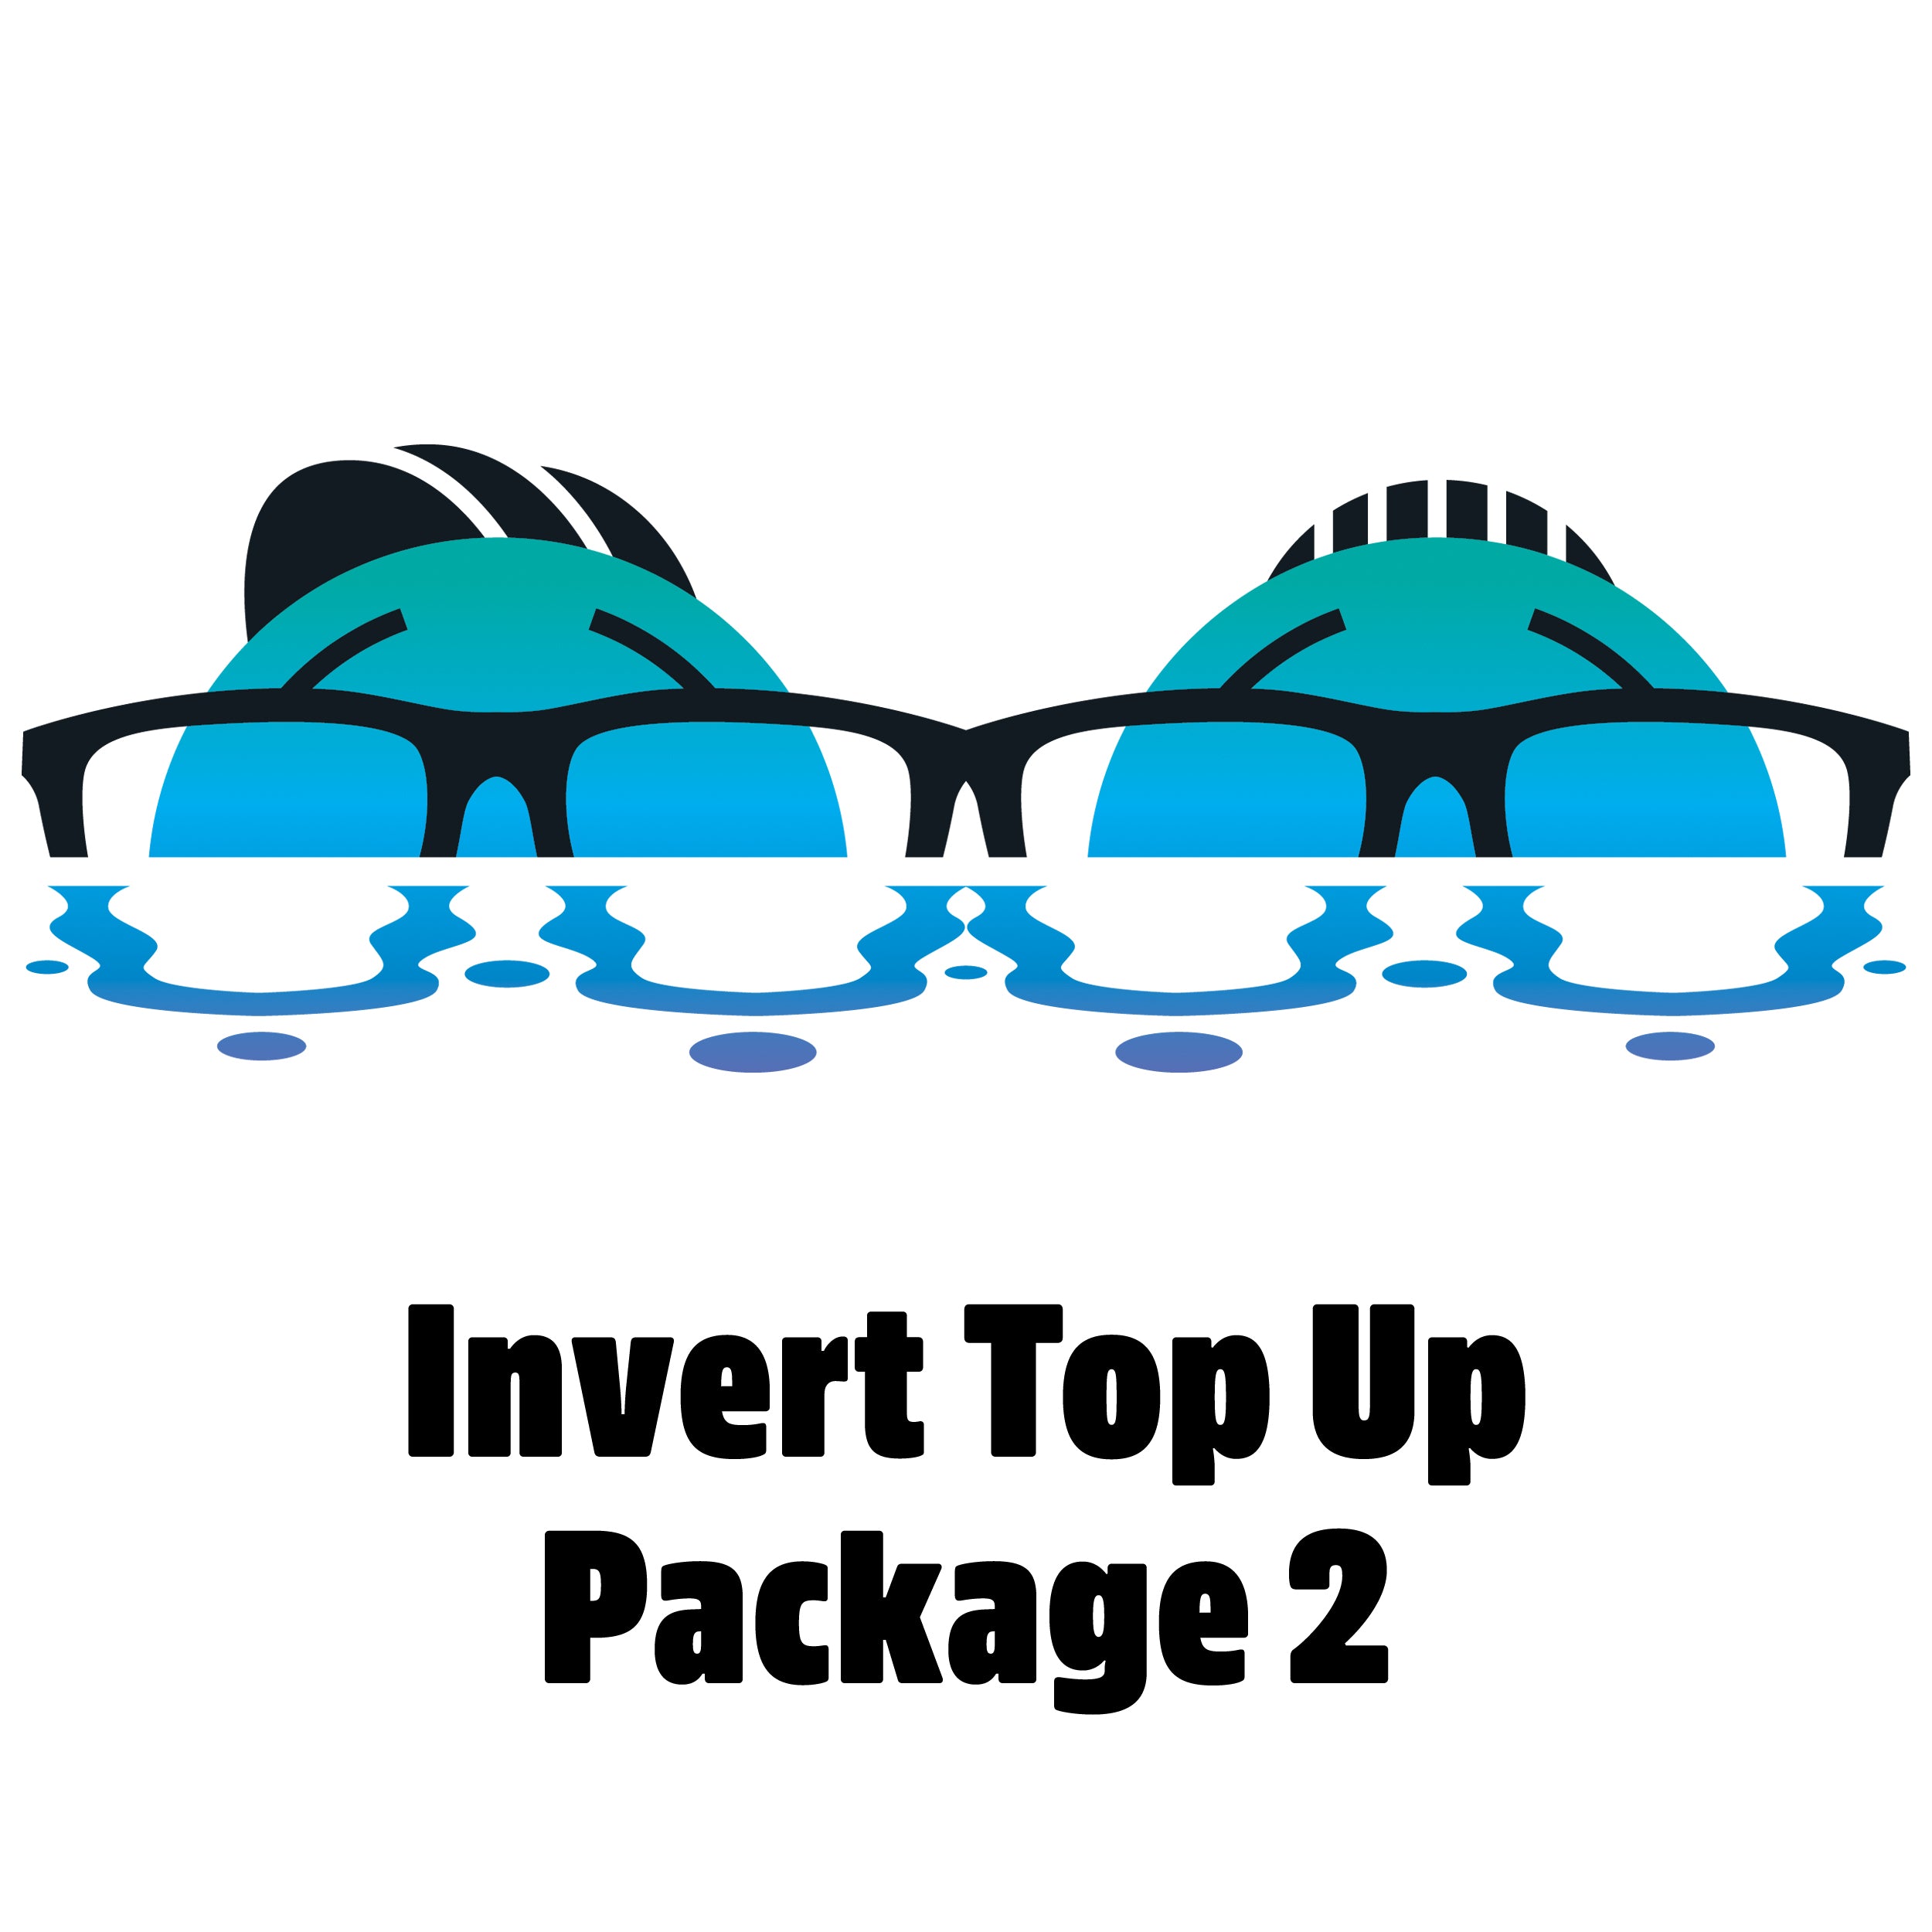 Invert top up- Package 2